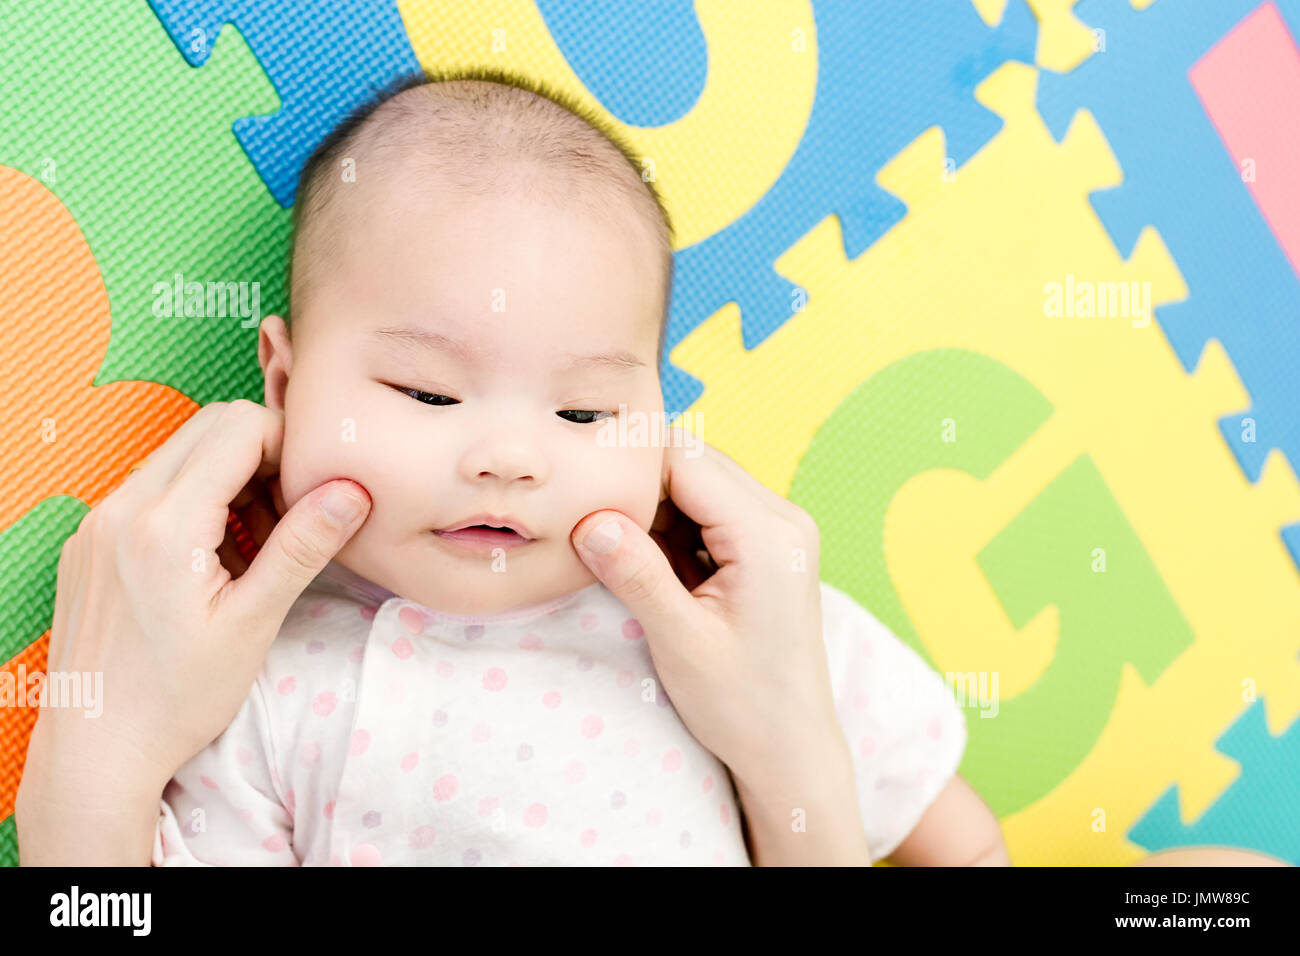 Parent pinch the cheeks a little adorable newborn infant baby girl that lying on the back on colorful eva foam indoors Stock Photo